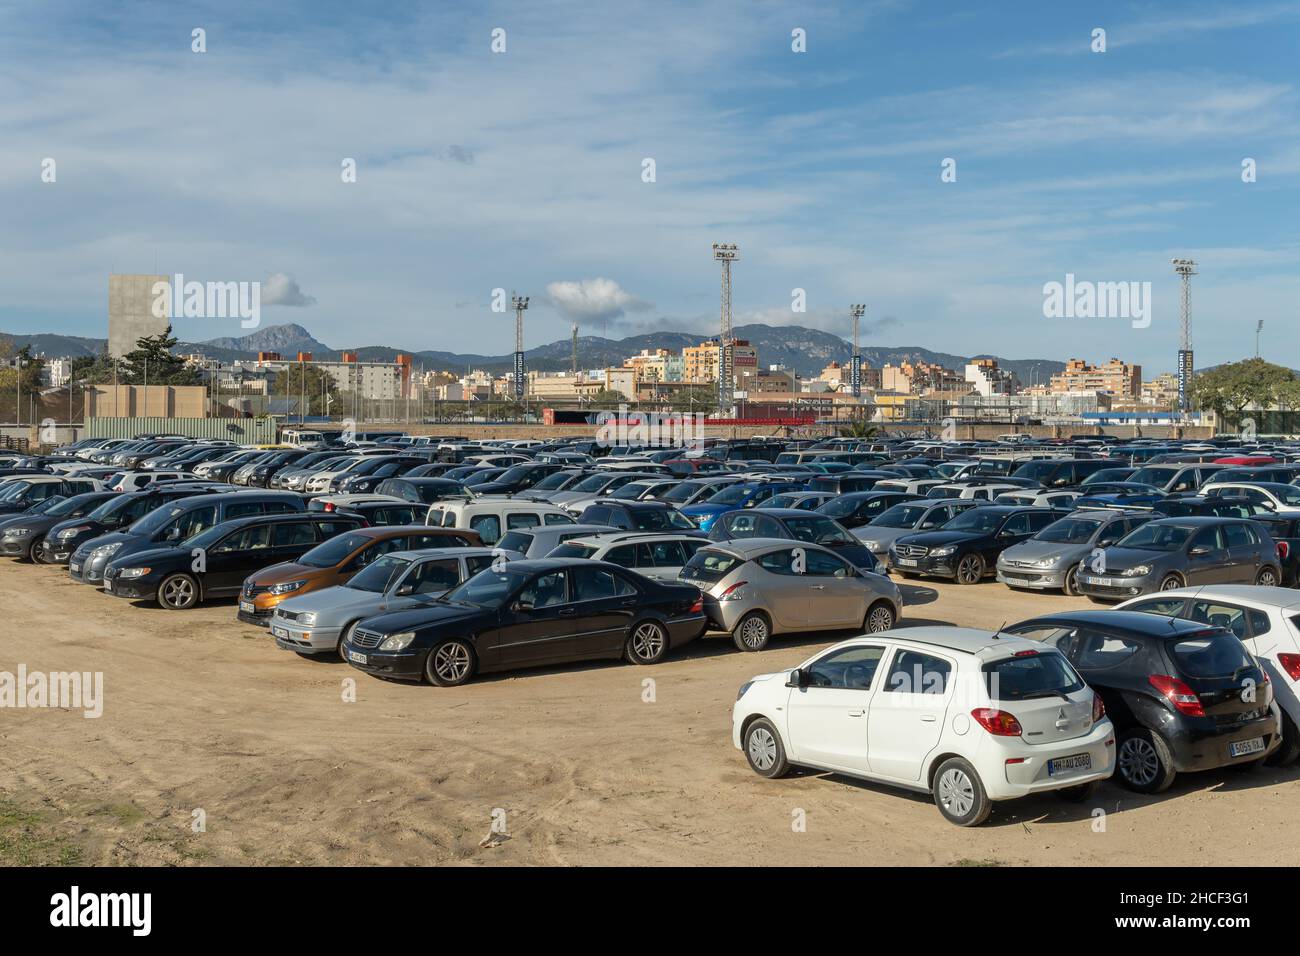 Palma de Mallorca, Spain; december 27 2021: Municipal parking of fined cars, confiscated by the police. Palma de Mallorca, Spain Stock Photo